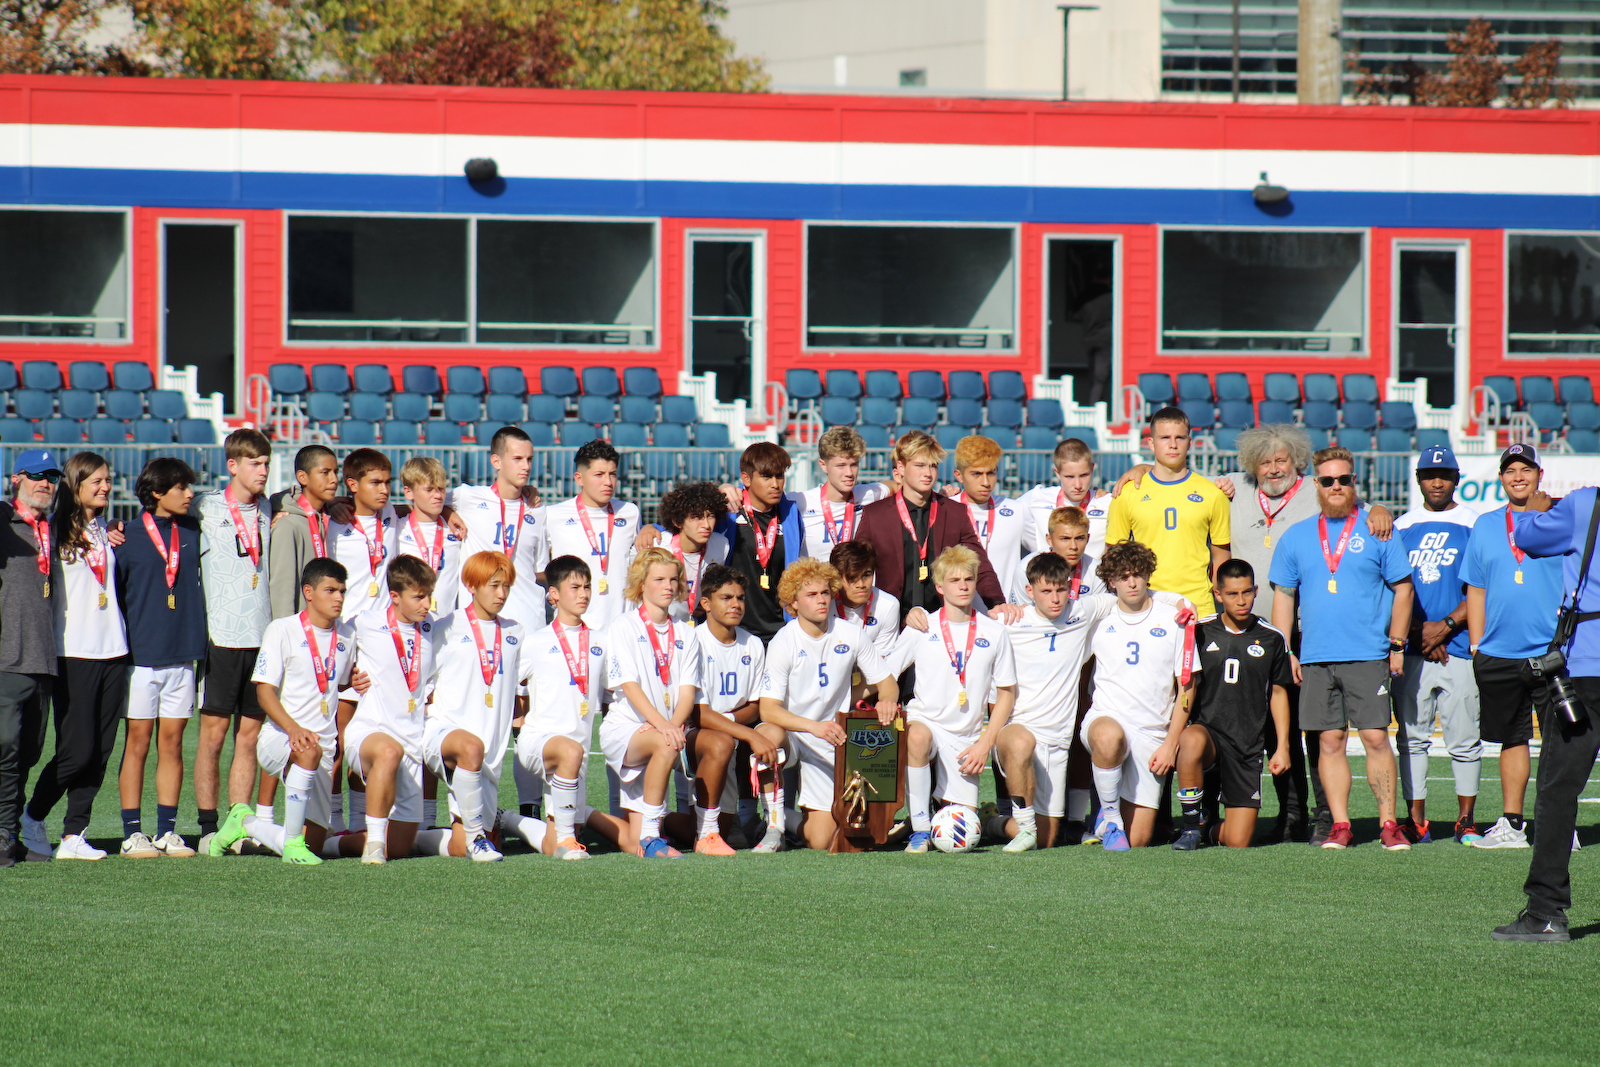 2022 Boys Soccer vs Noblesville (State Finals) 10-29-22 (Photos by Mila Esposito) gallery cover photo